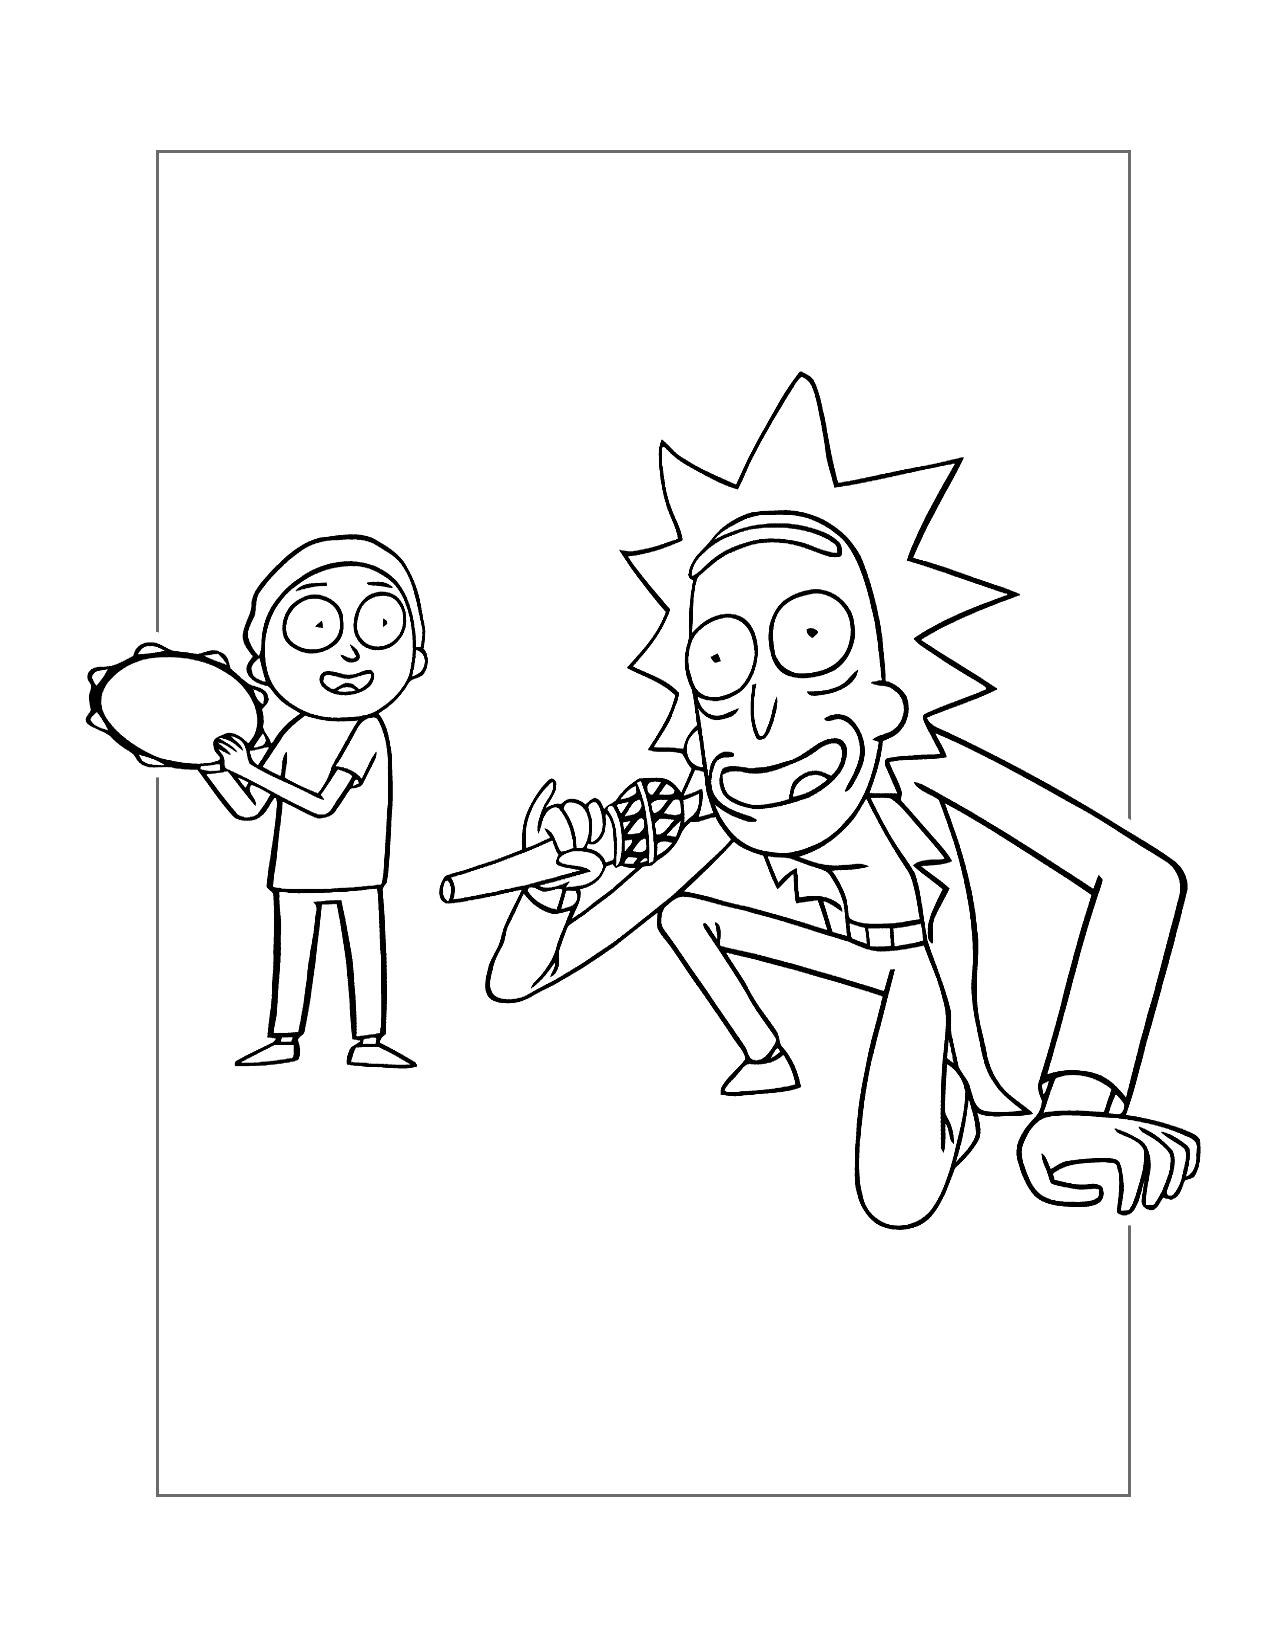 Rick And Morty Getting Schwifty Coloring Page